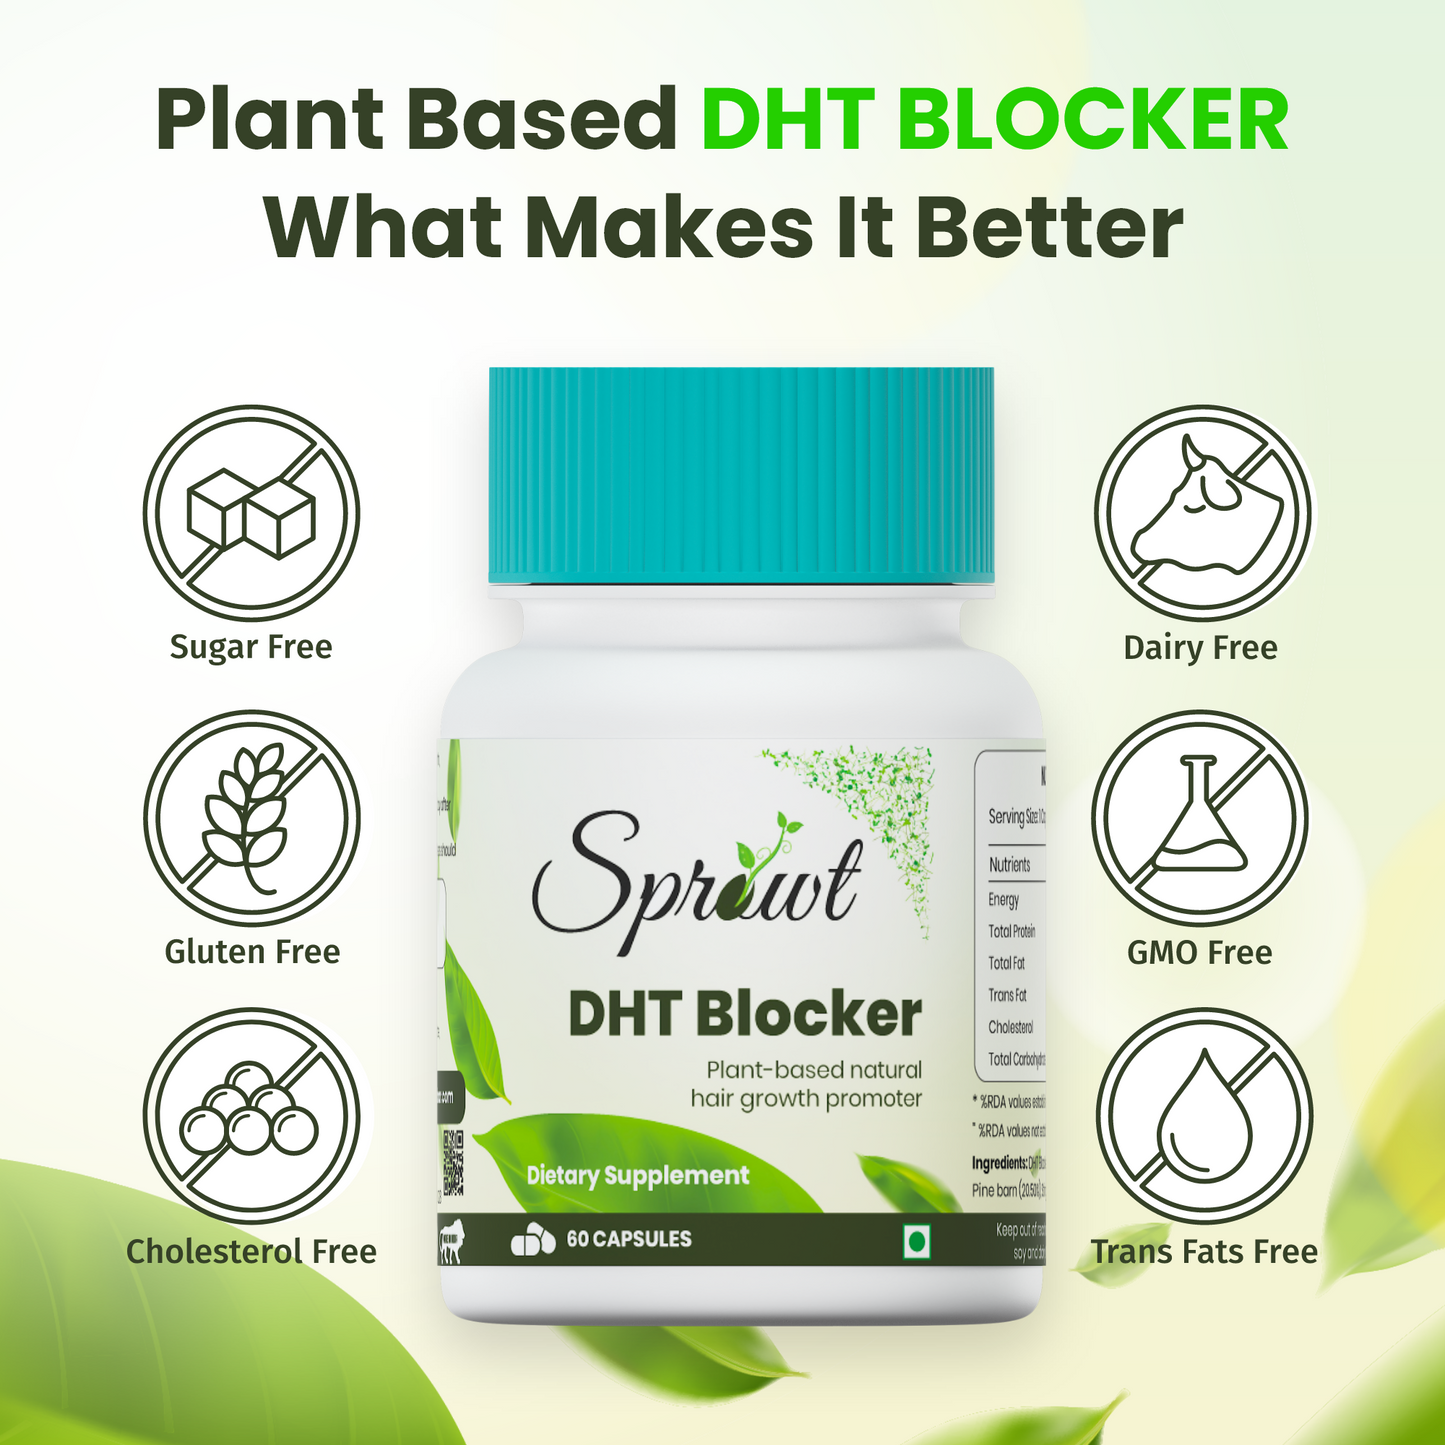 Sprowt Plant Based DHT Blocker Capsule for Hair Growth, Helps Reduce Hair Fall | Pack of 2, 60 Capsules